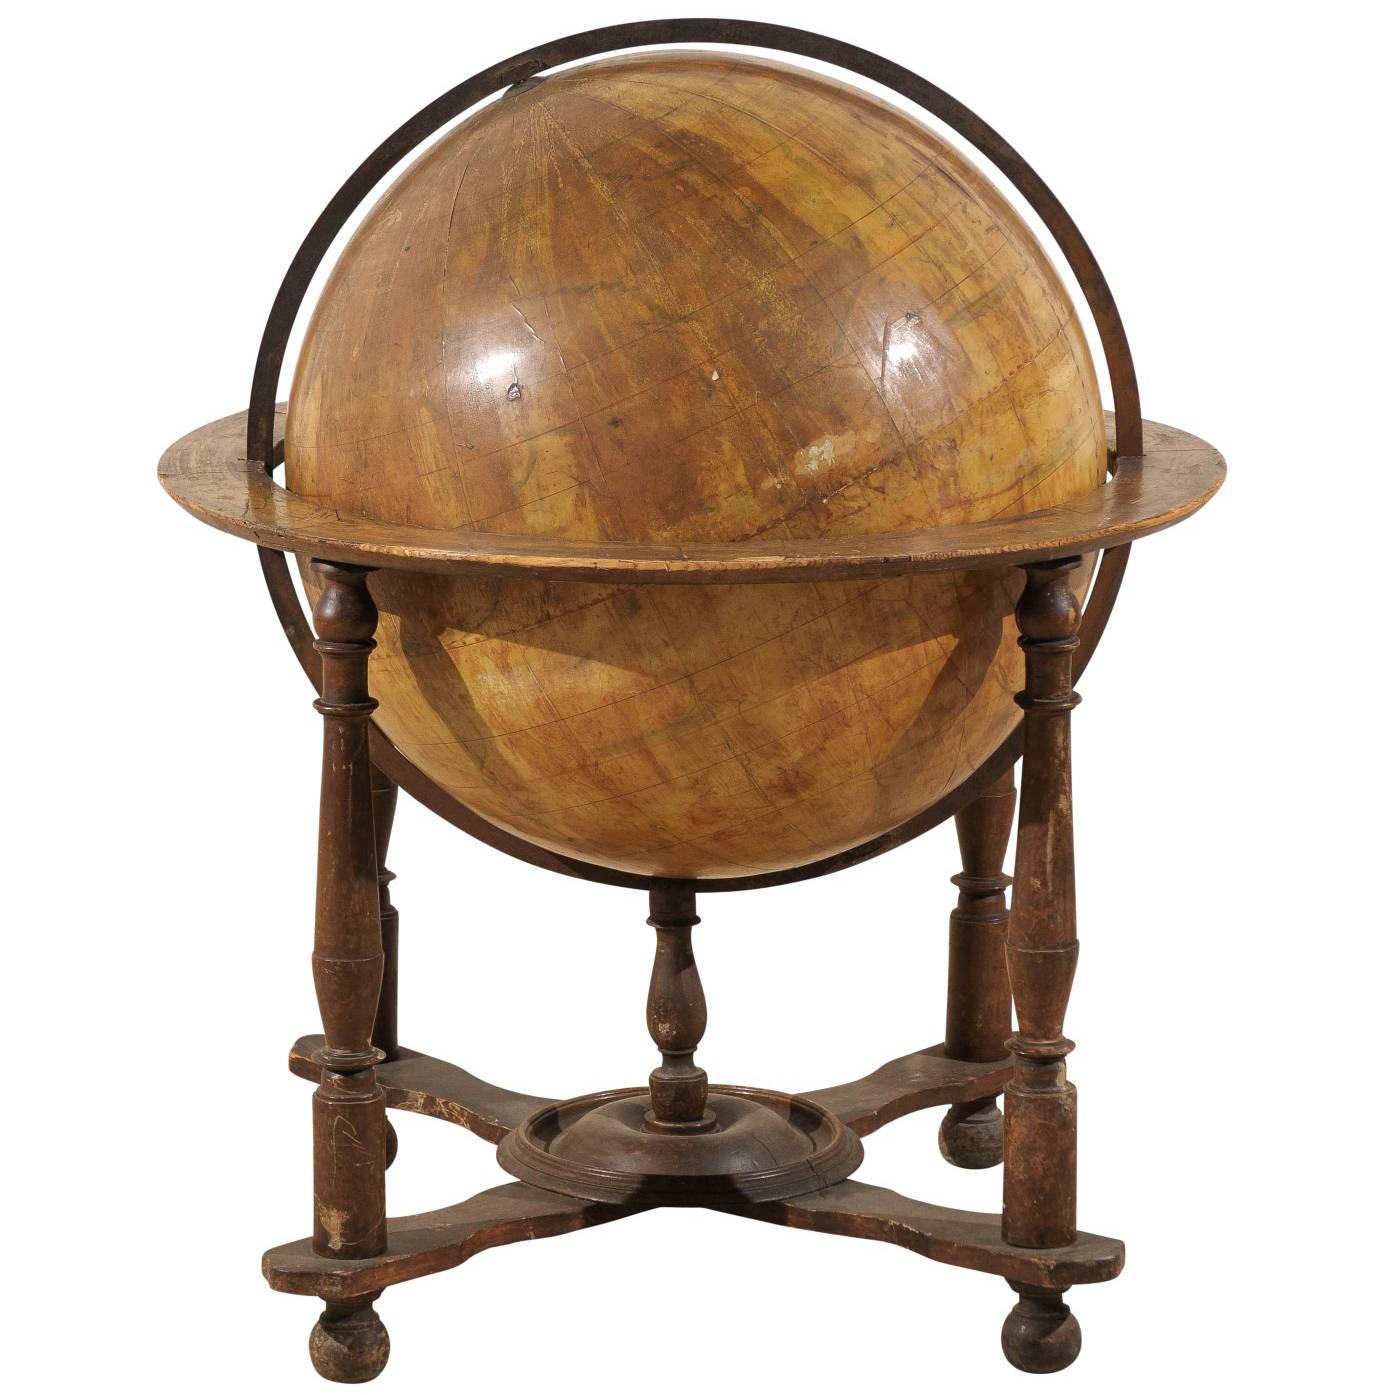 A Large-Sized Italian Heavily Foxed Velum Covered Globe on Wood Stand, 19th C.  For Sale